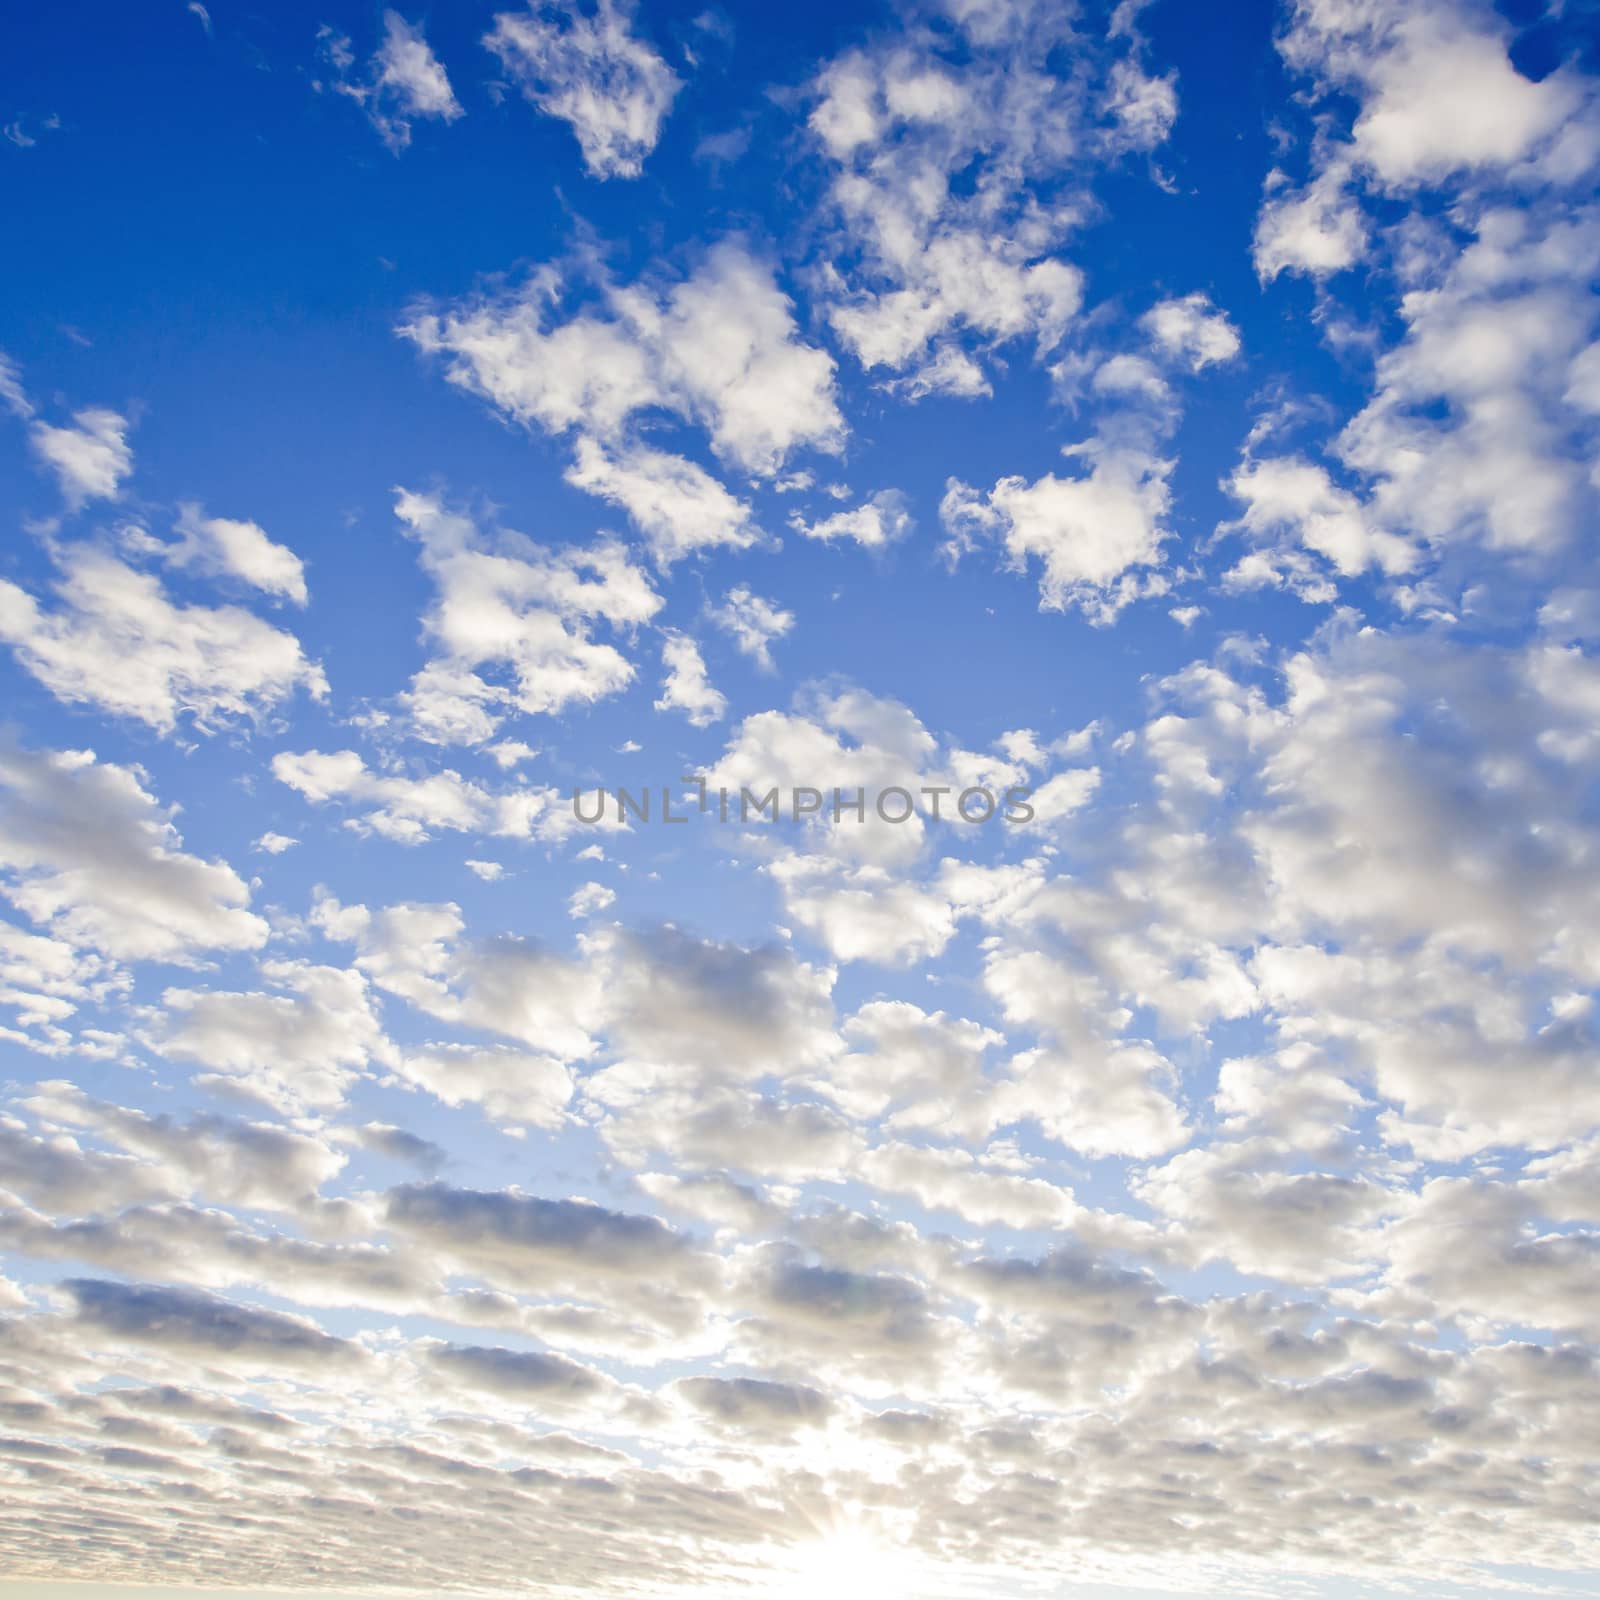 blue sky with clouds closeup by art9858